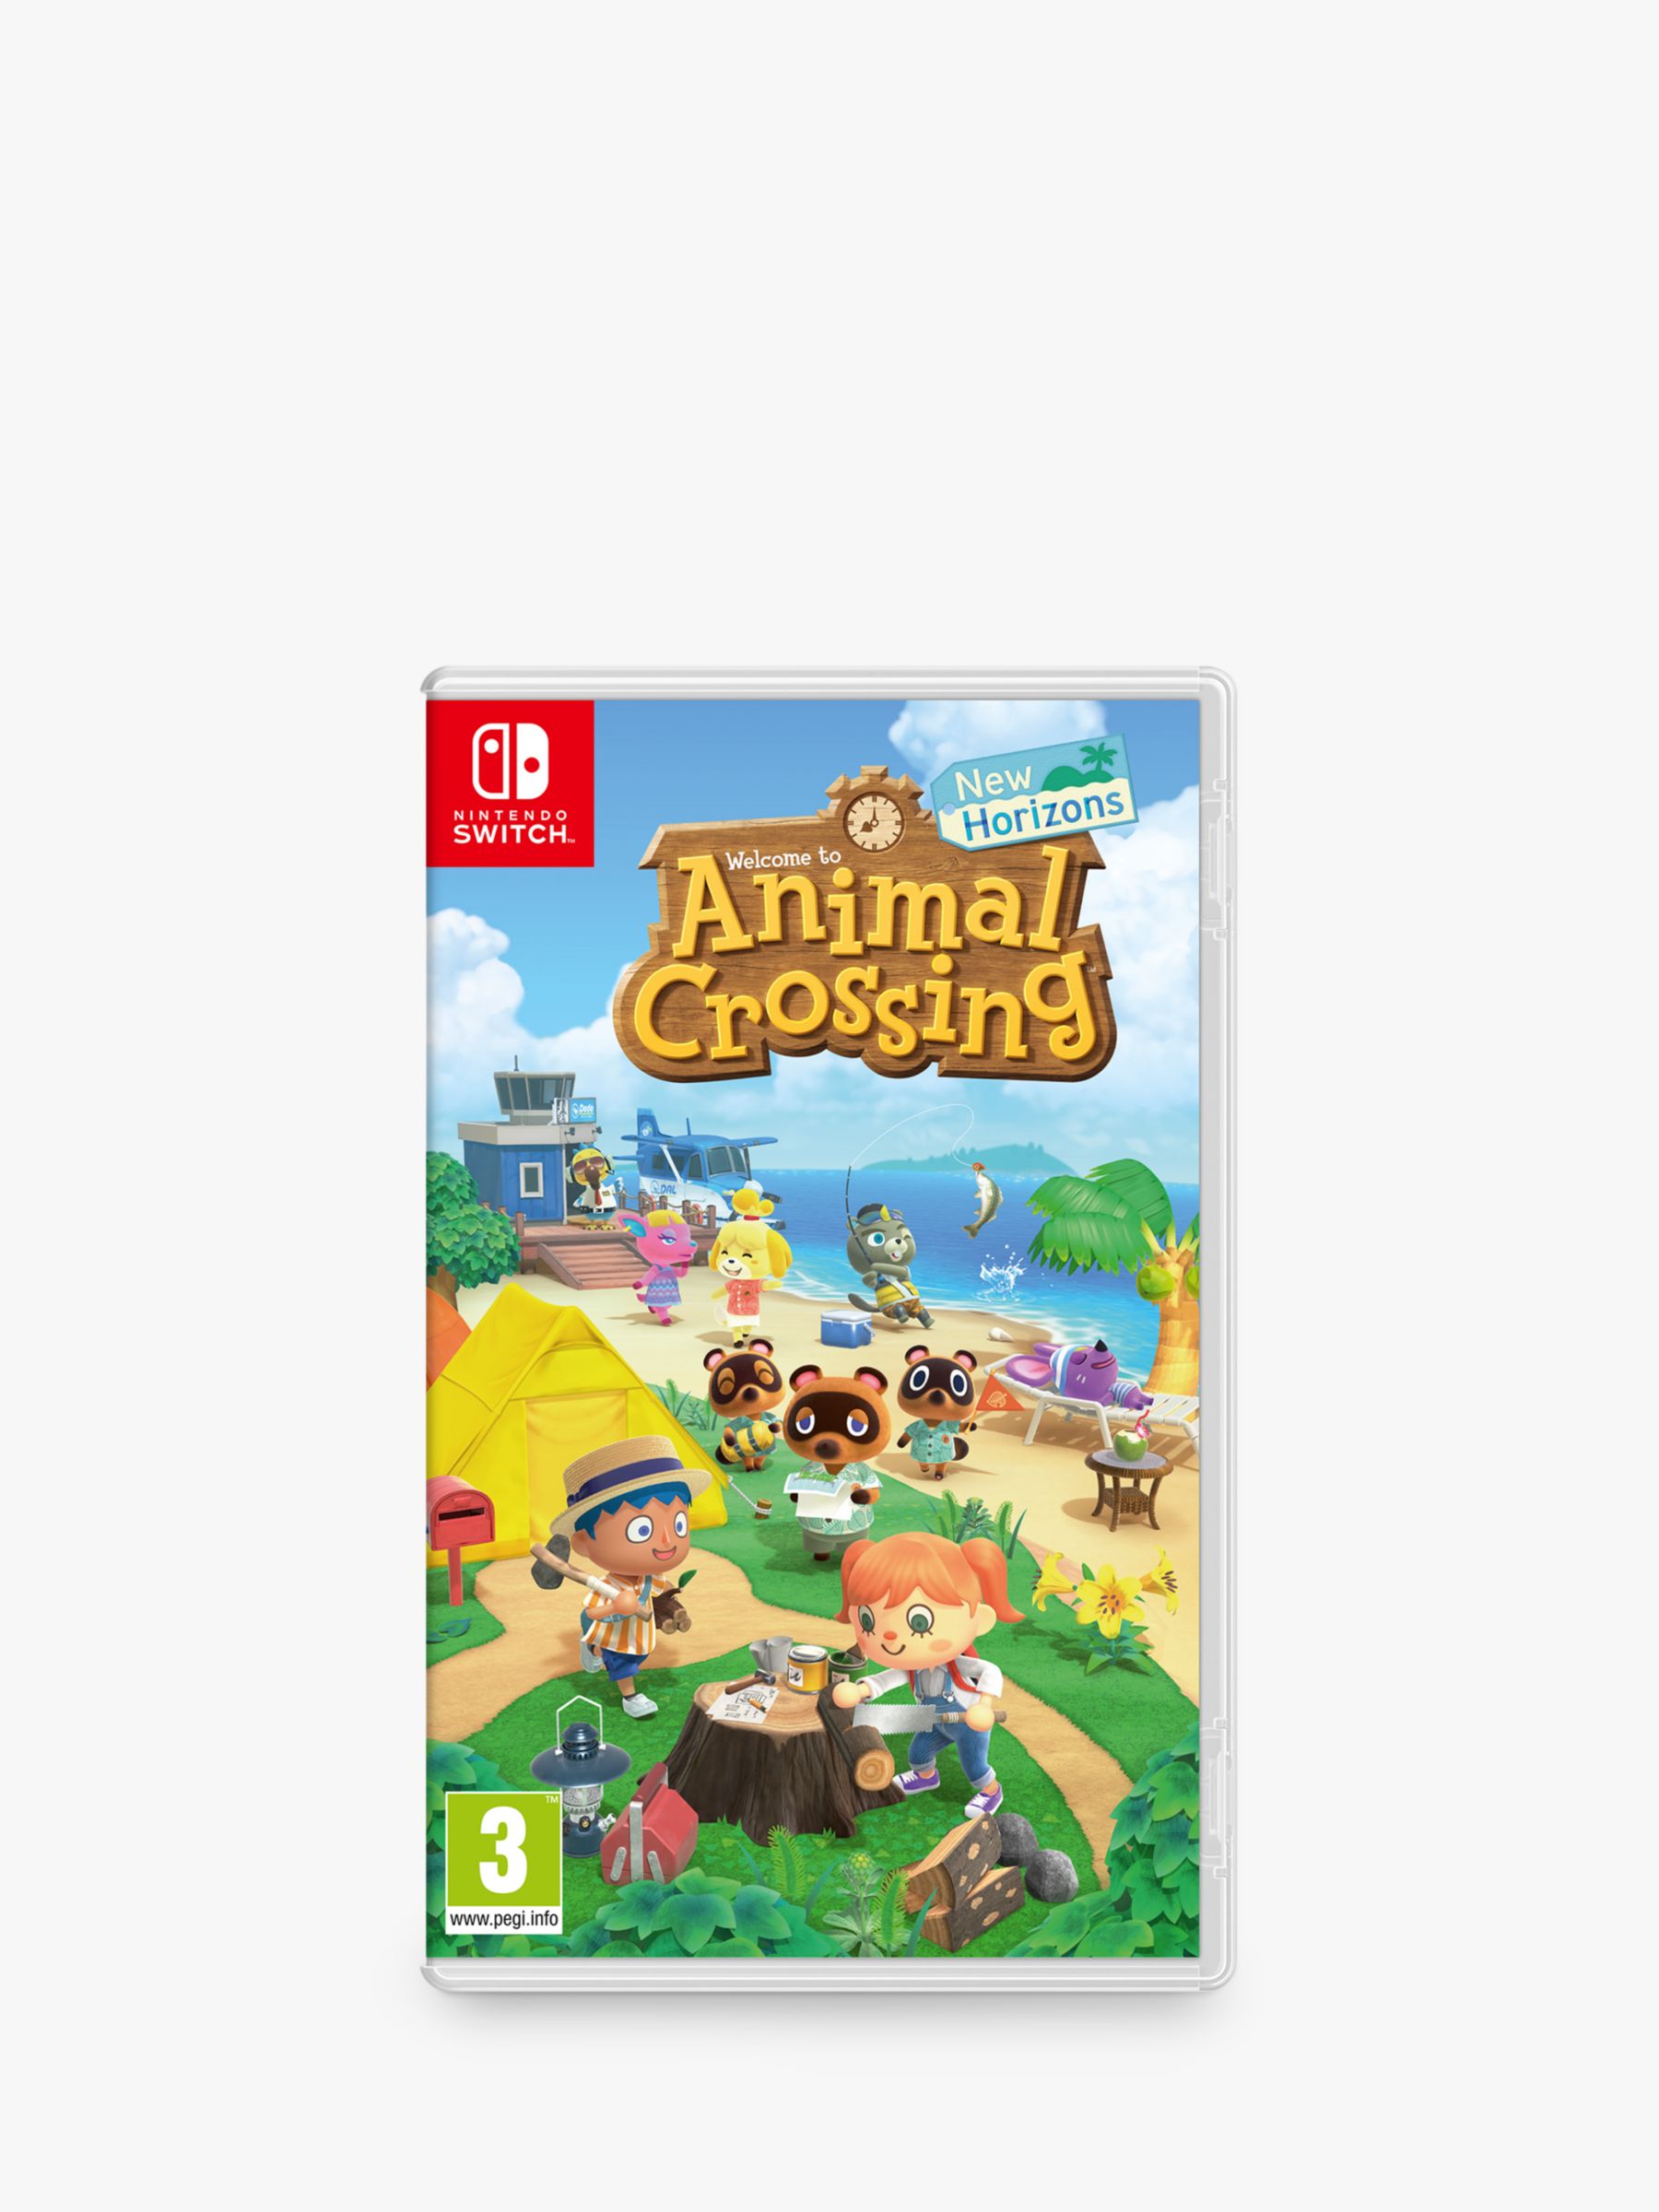 is animal crossing on the switch